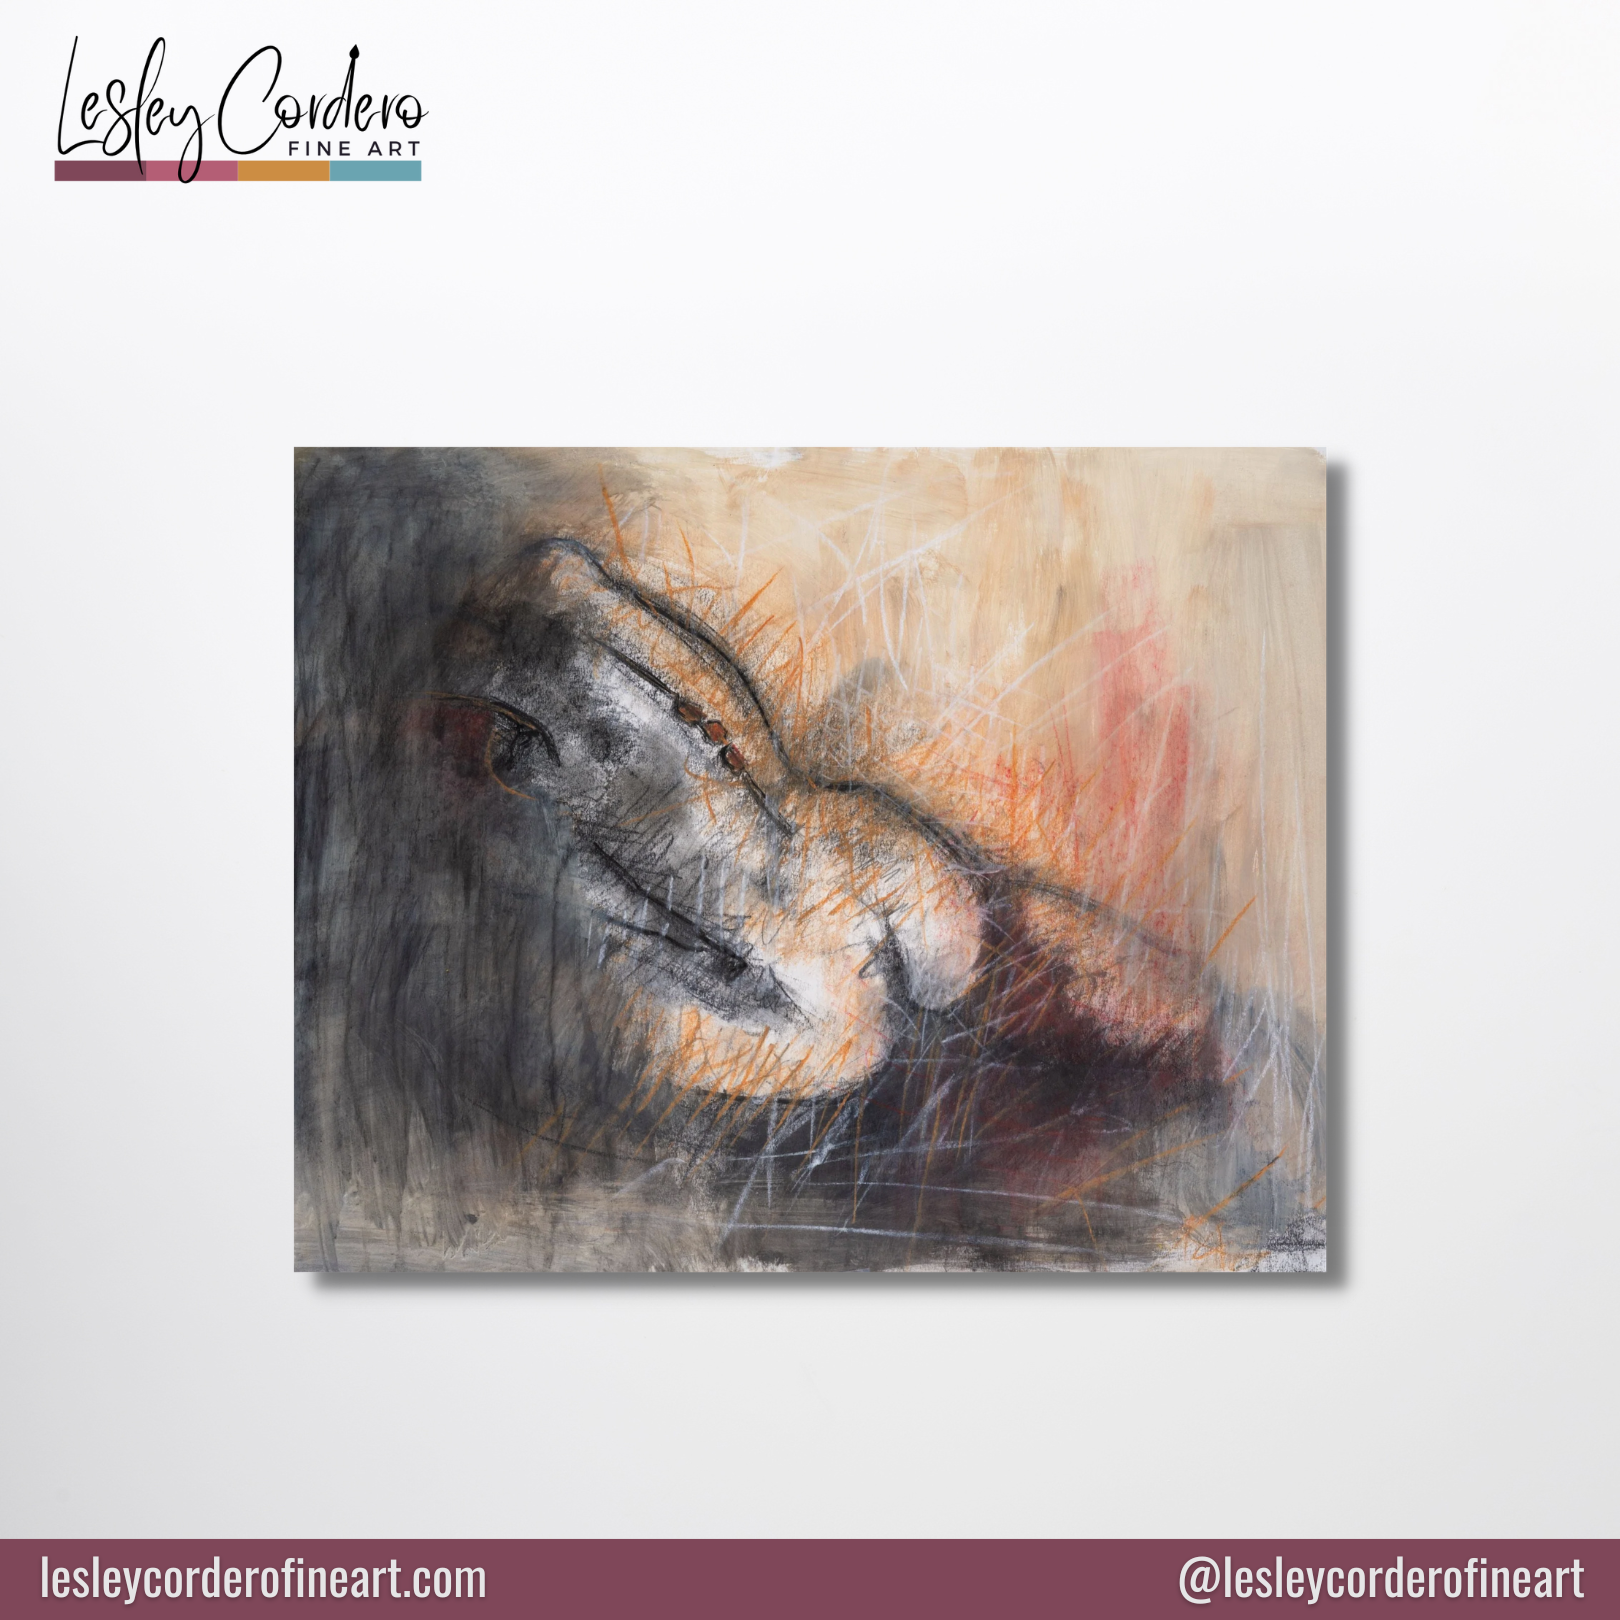 Abstract Figure print available in various sizes and sent unframed so you can select your preferred frame.